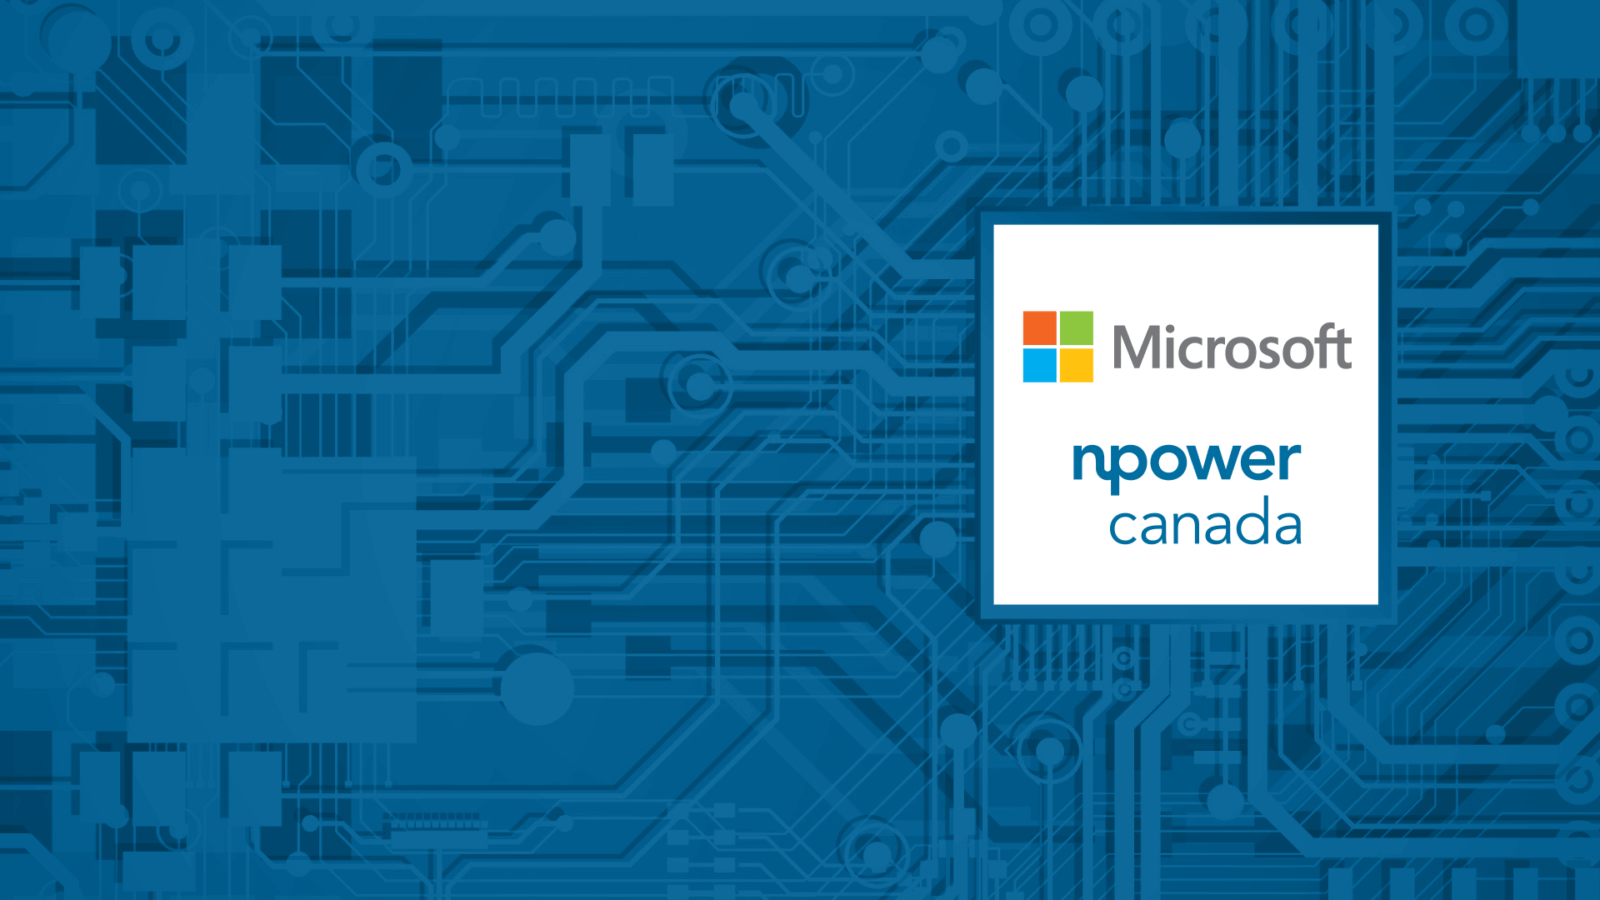 Microsoft logo in grey font text with multicolored icon and NPower Canada logo in blue font text inside a white box with blue outline on a blue background